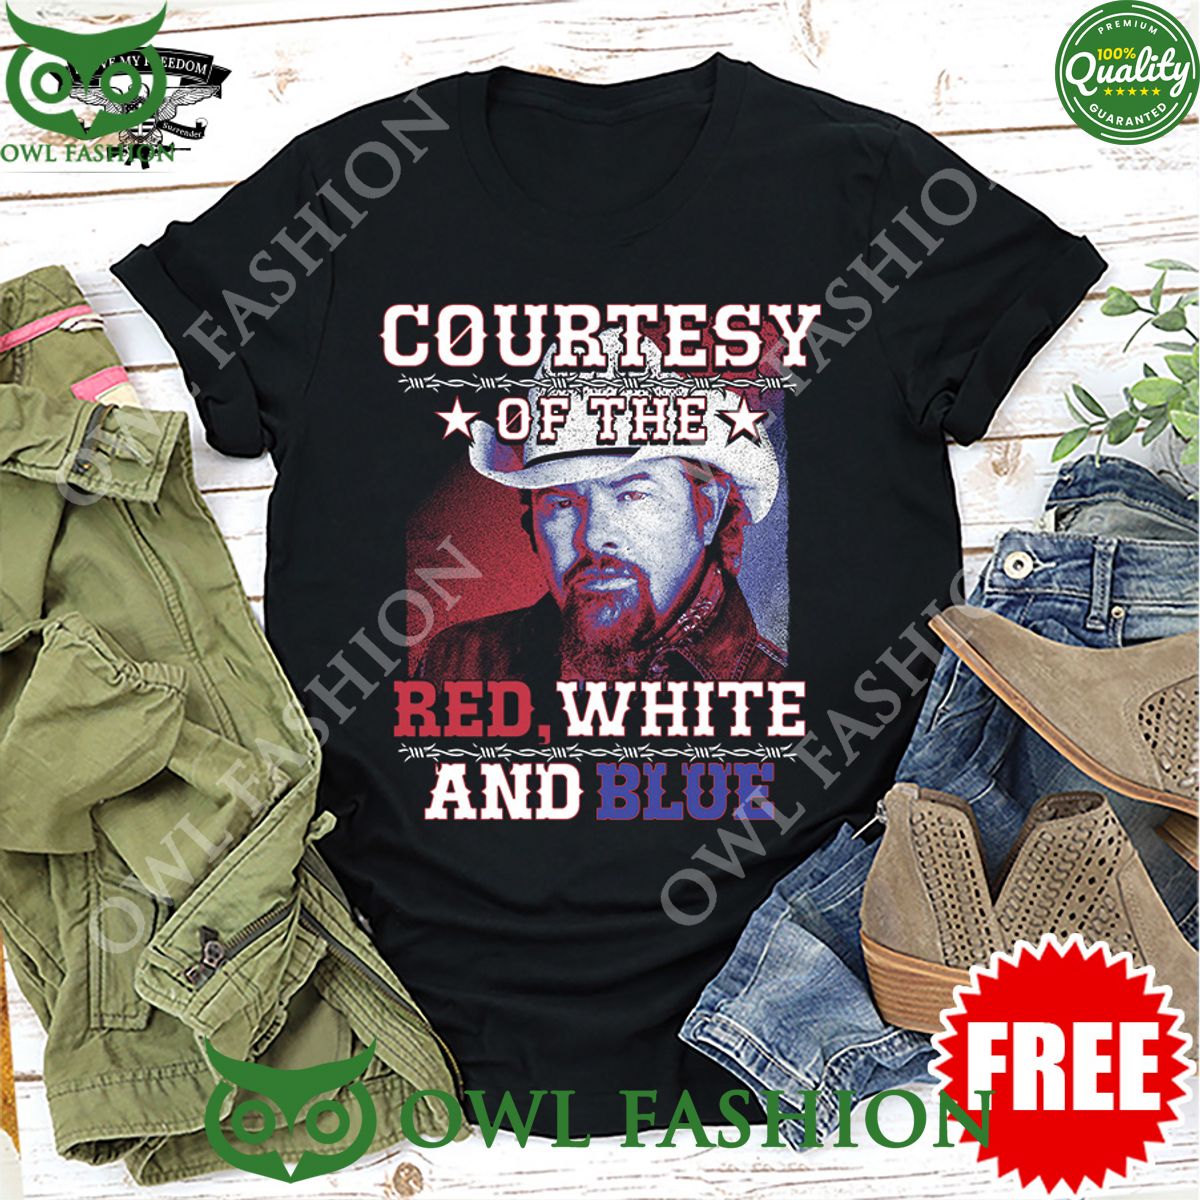 Courtesy of the Red White and Blue Song by Toby Keith The Angry American t shirt